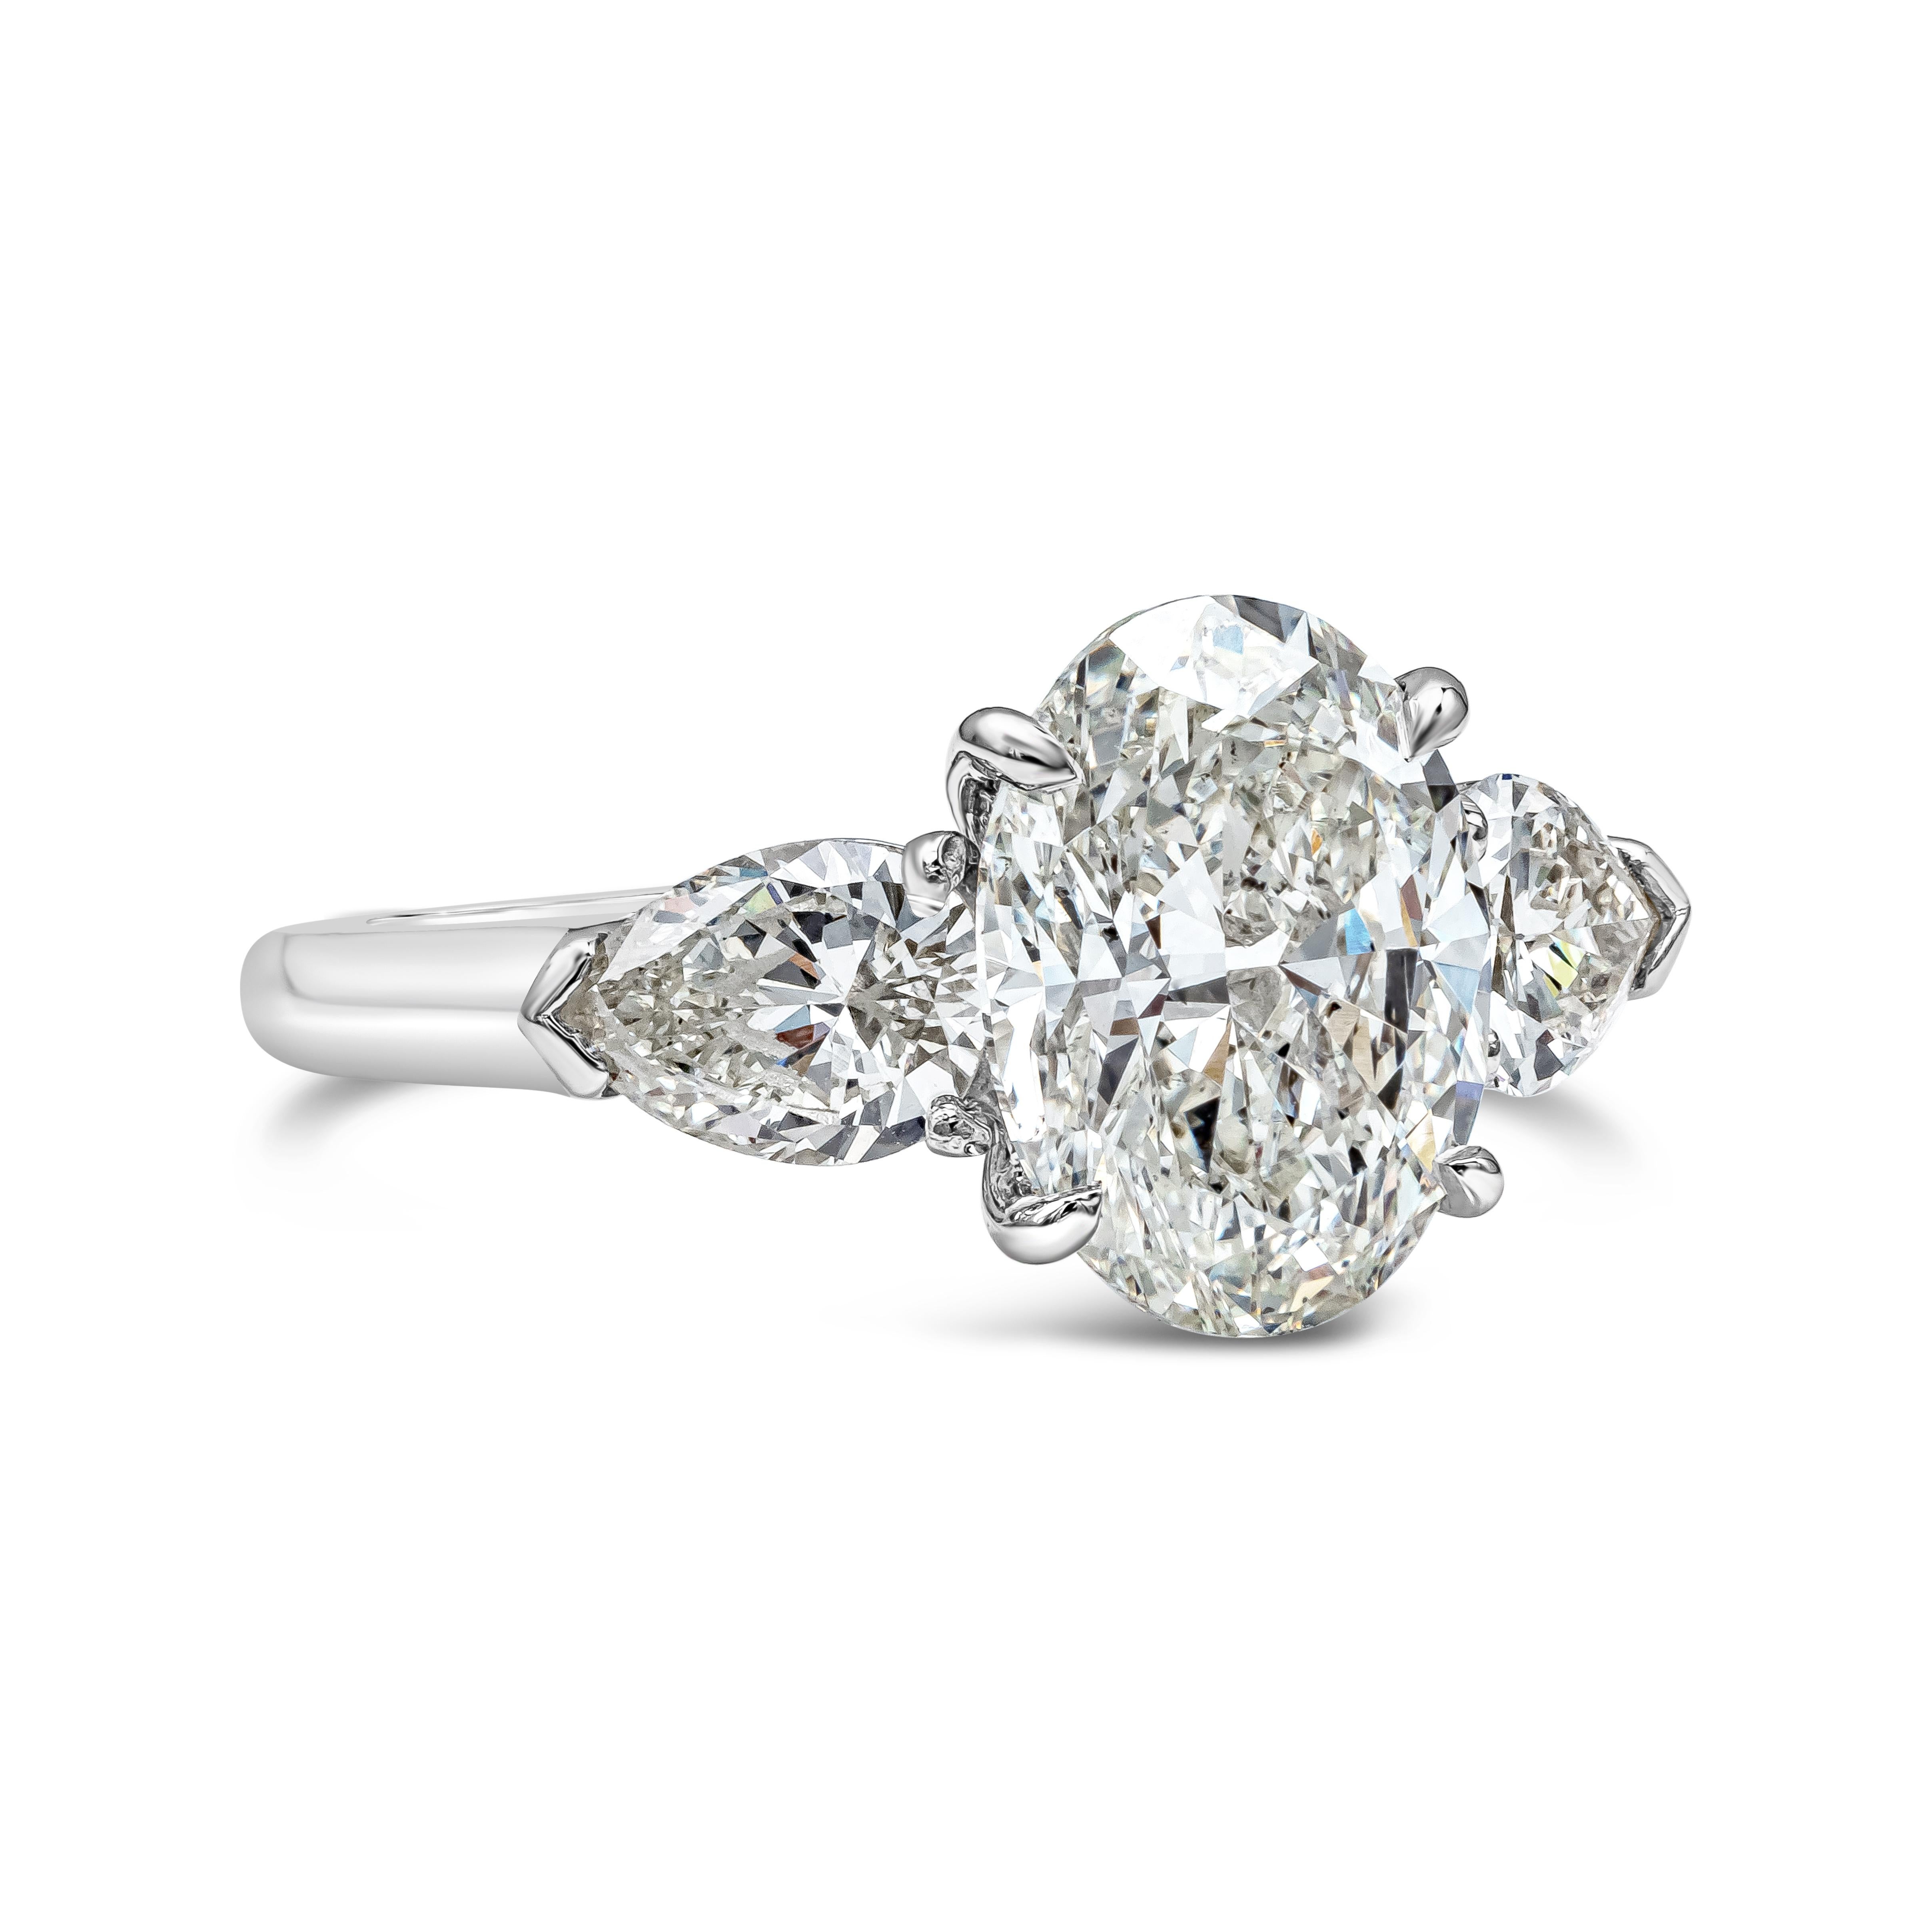  A classic three-stone engagement ring showcasing a 3.02 carat oval cut diamond certified by GIA as J color, SI1 clarity, flanked by pear shape diamonds on either side. Accent diamonds weigh 1.01 carats and are approximately J color, VS clarity. Set